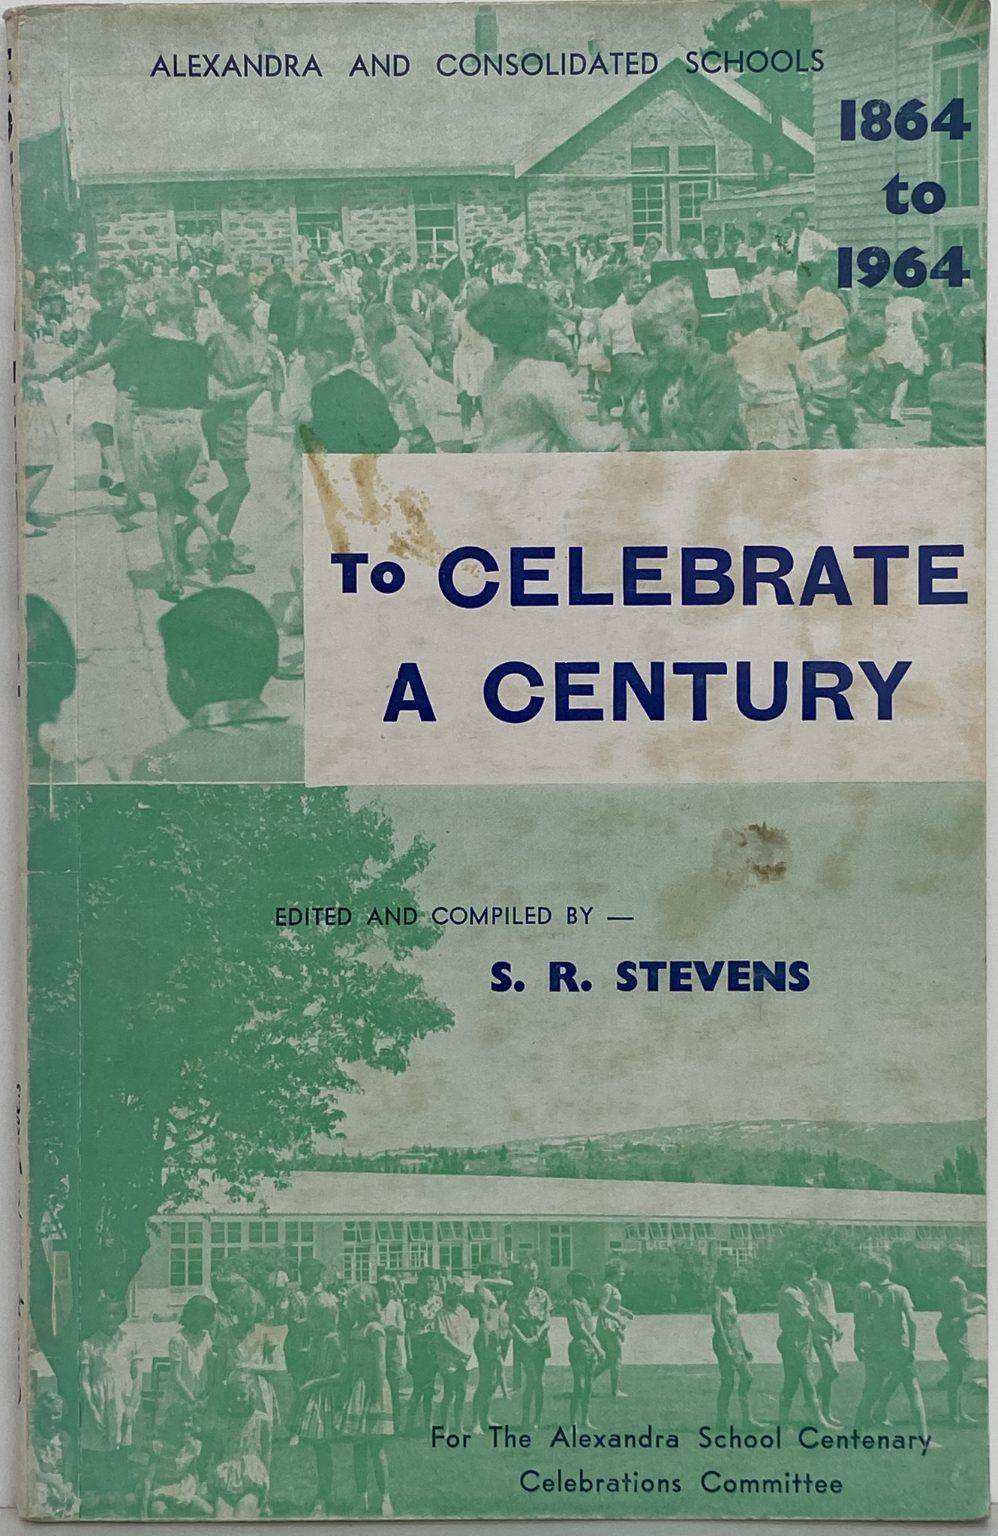 TO CELEBRATE A CENTURY: Alexandra and Consolidated Schools 1864 - 1964